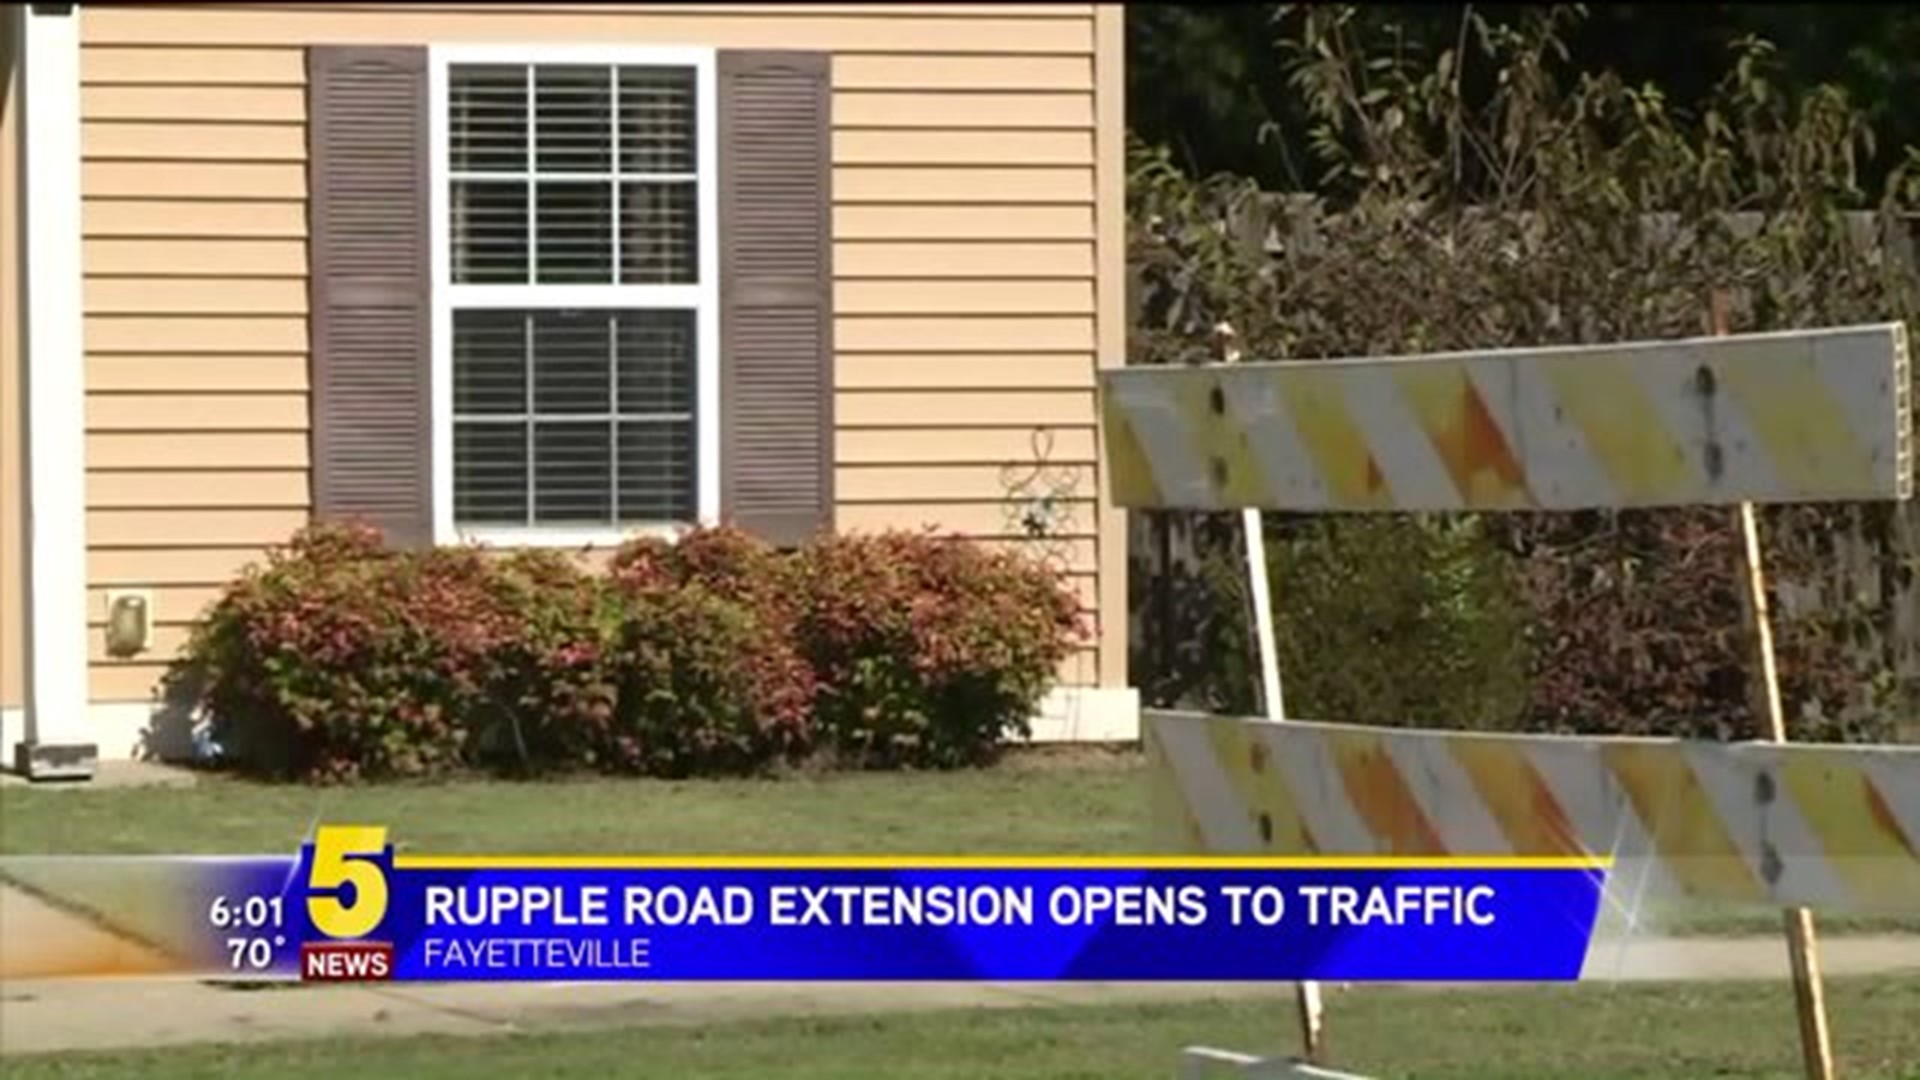 Rupple Rd. Extension Opens To Traffic